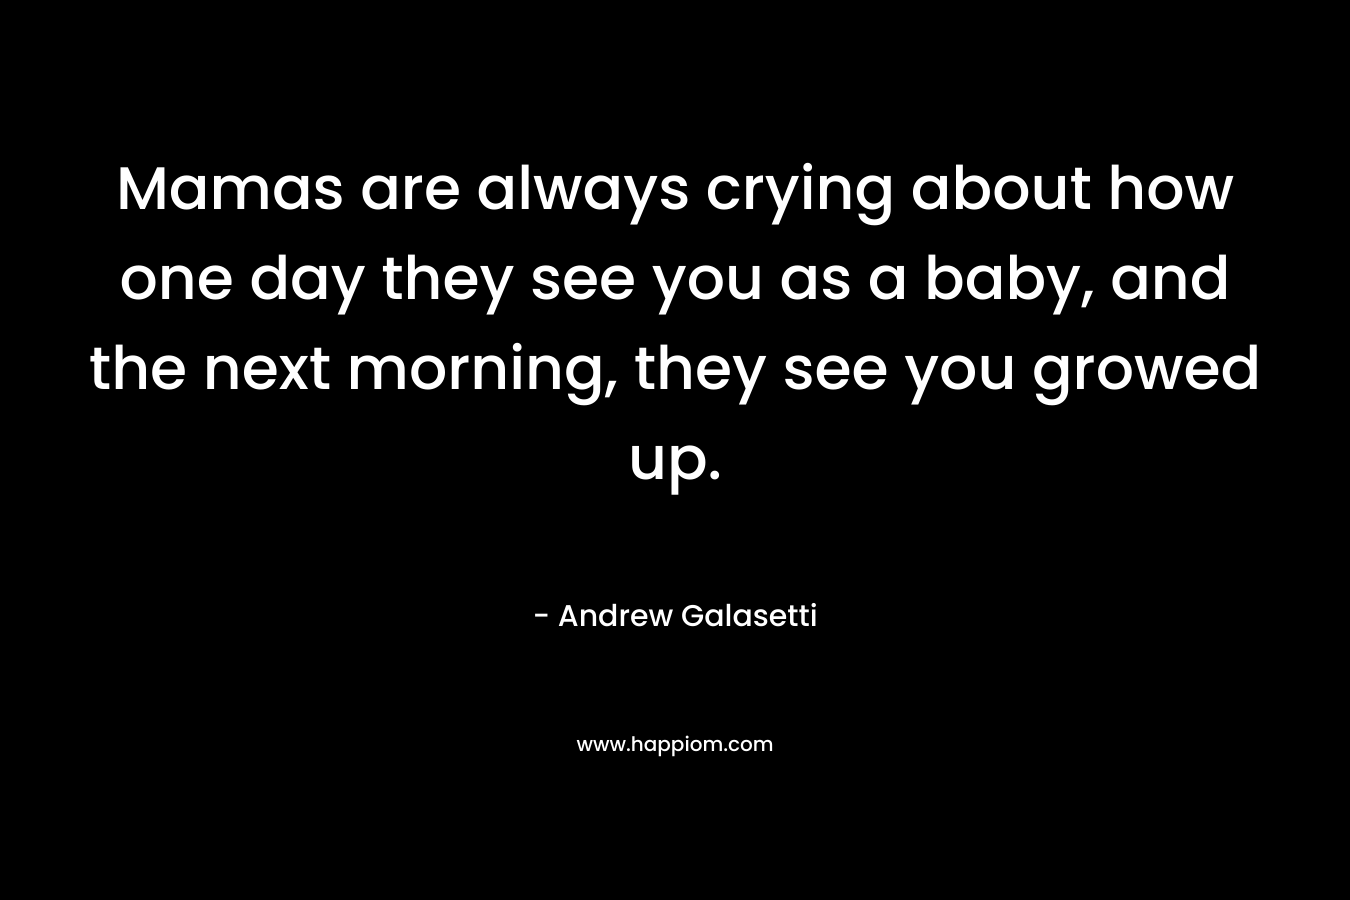 Mamas are always crying about how one day they see you as a baby, and the next morning, they see you growed up. – Andrew Galasetti